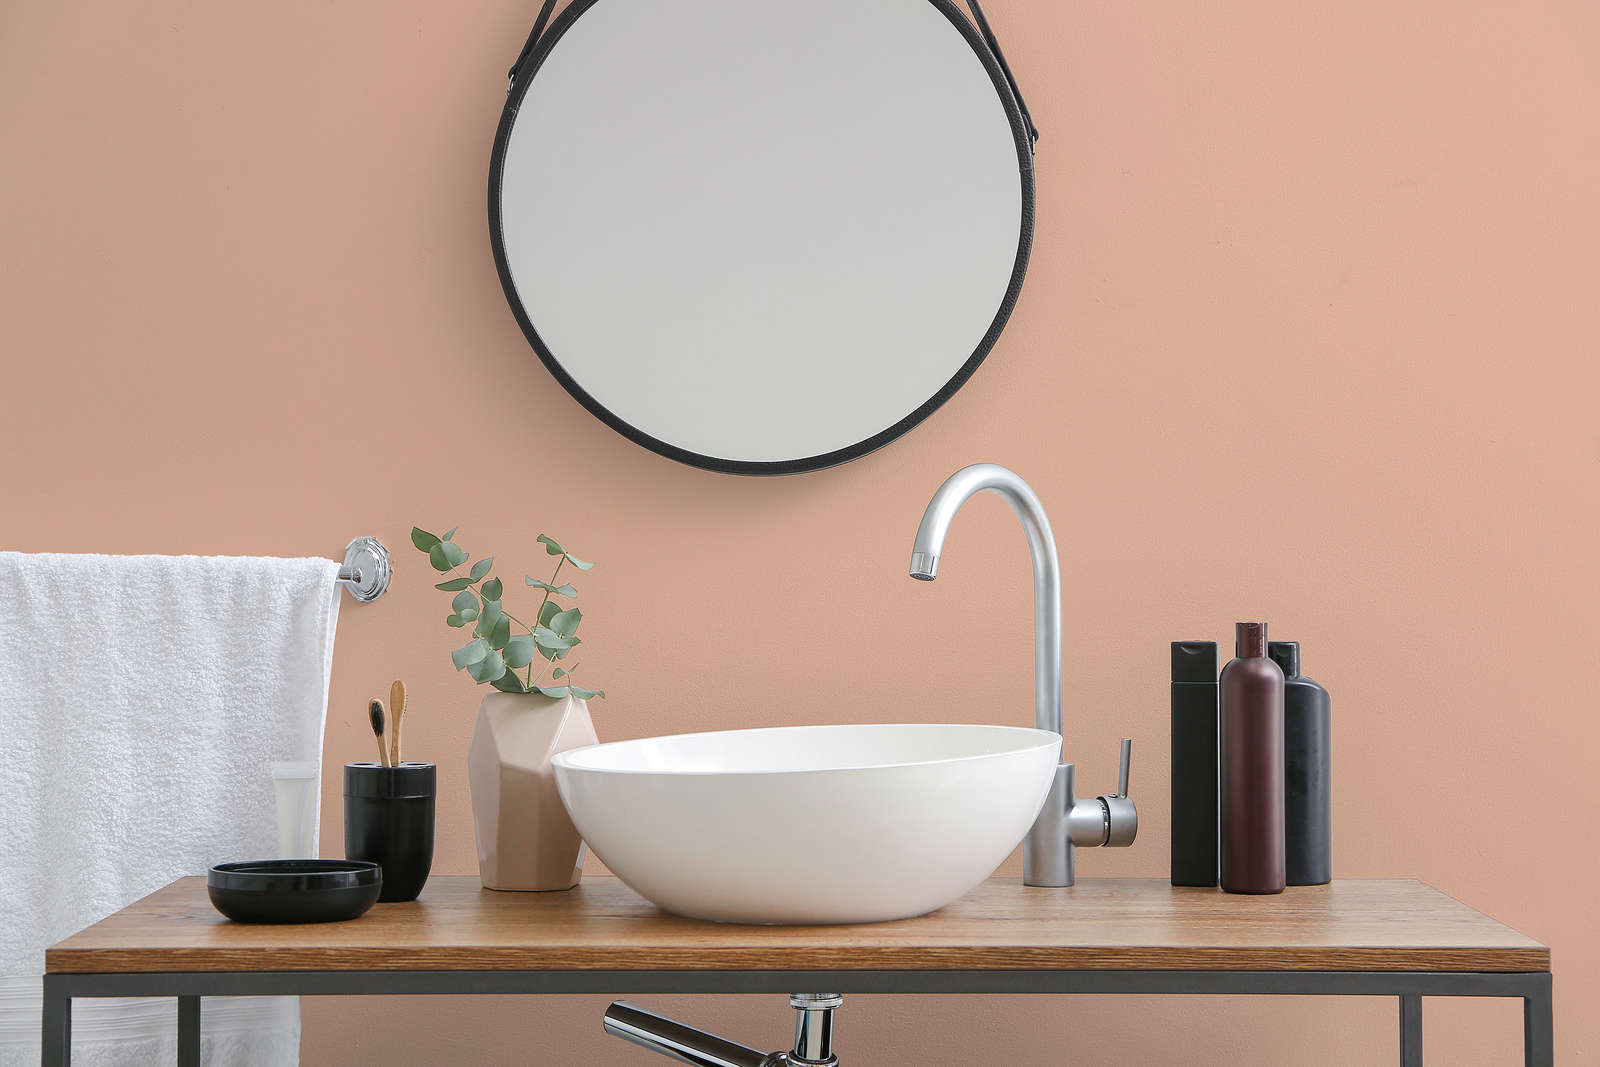             Premium Wall Paint serene salmon »Active Apricot« NW912 – 1 litre
        